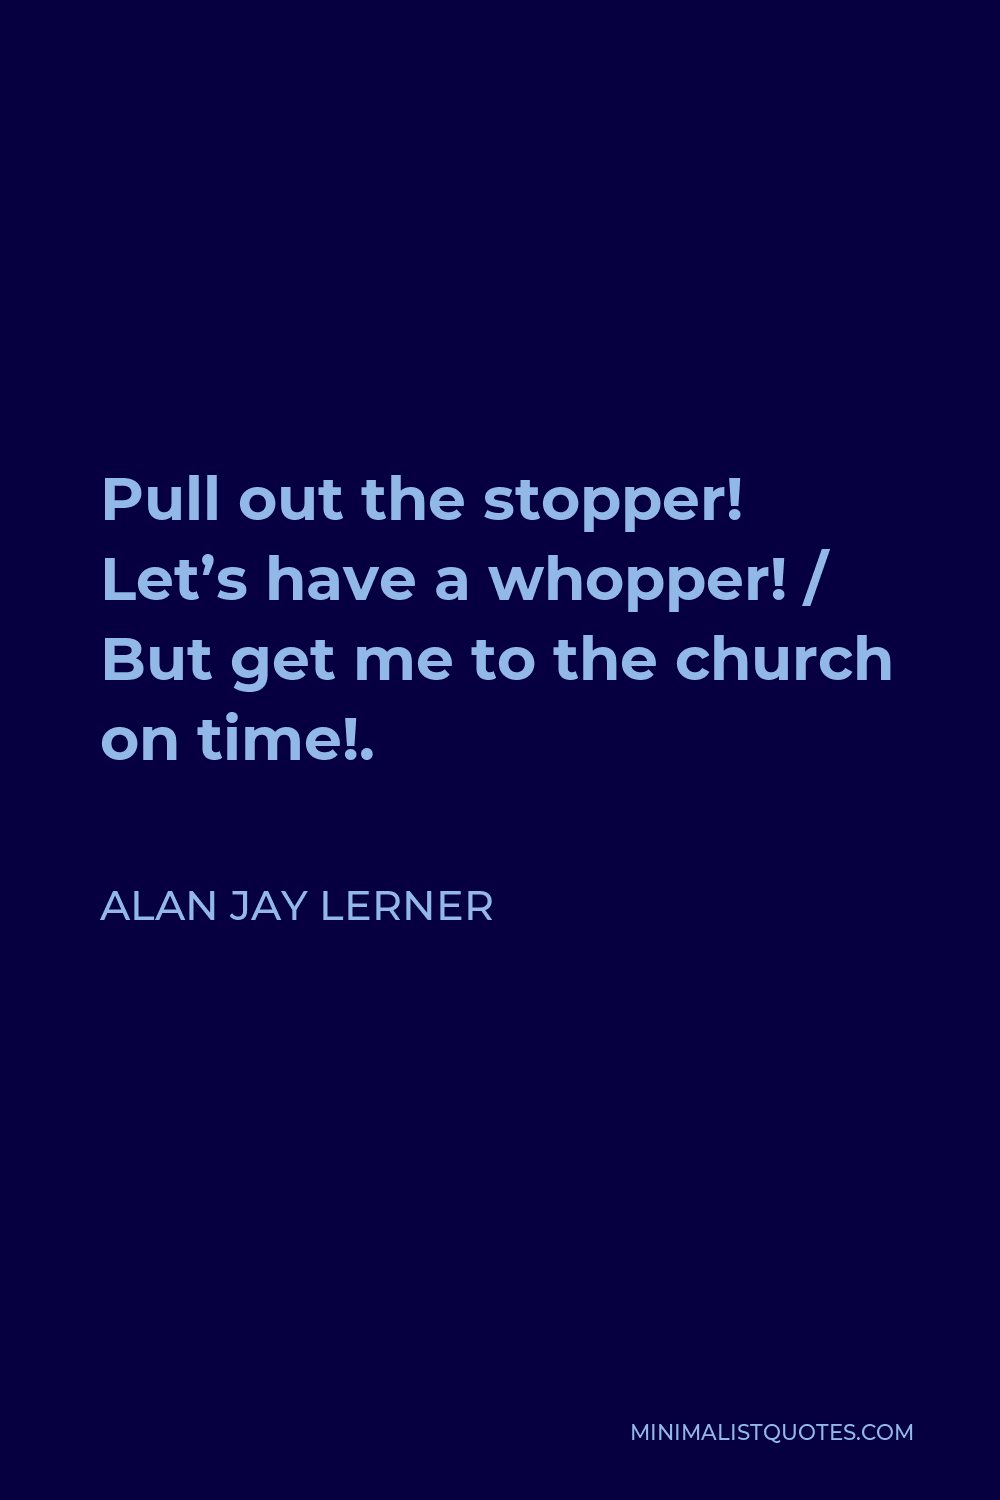 Alan Jay Lerner Quote - Pull out the stopper! Let’s have a whopper! / But get me to the church on time!.